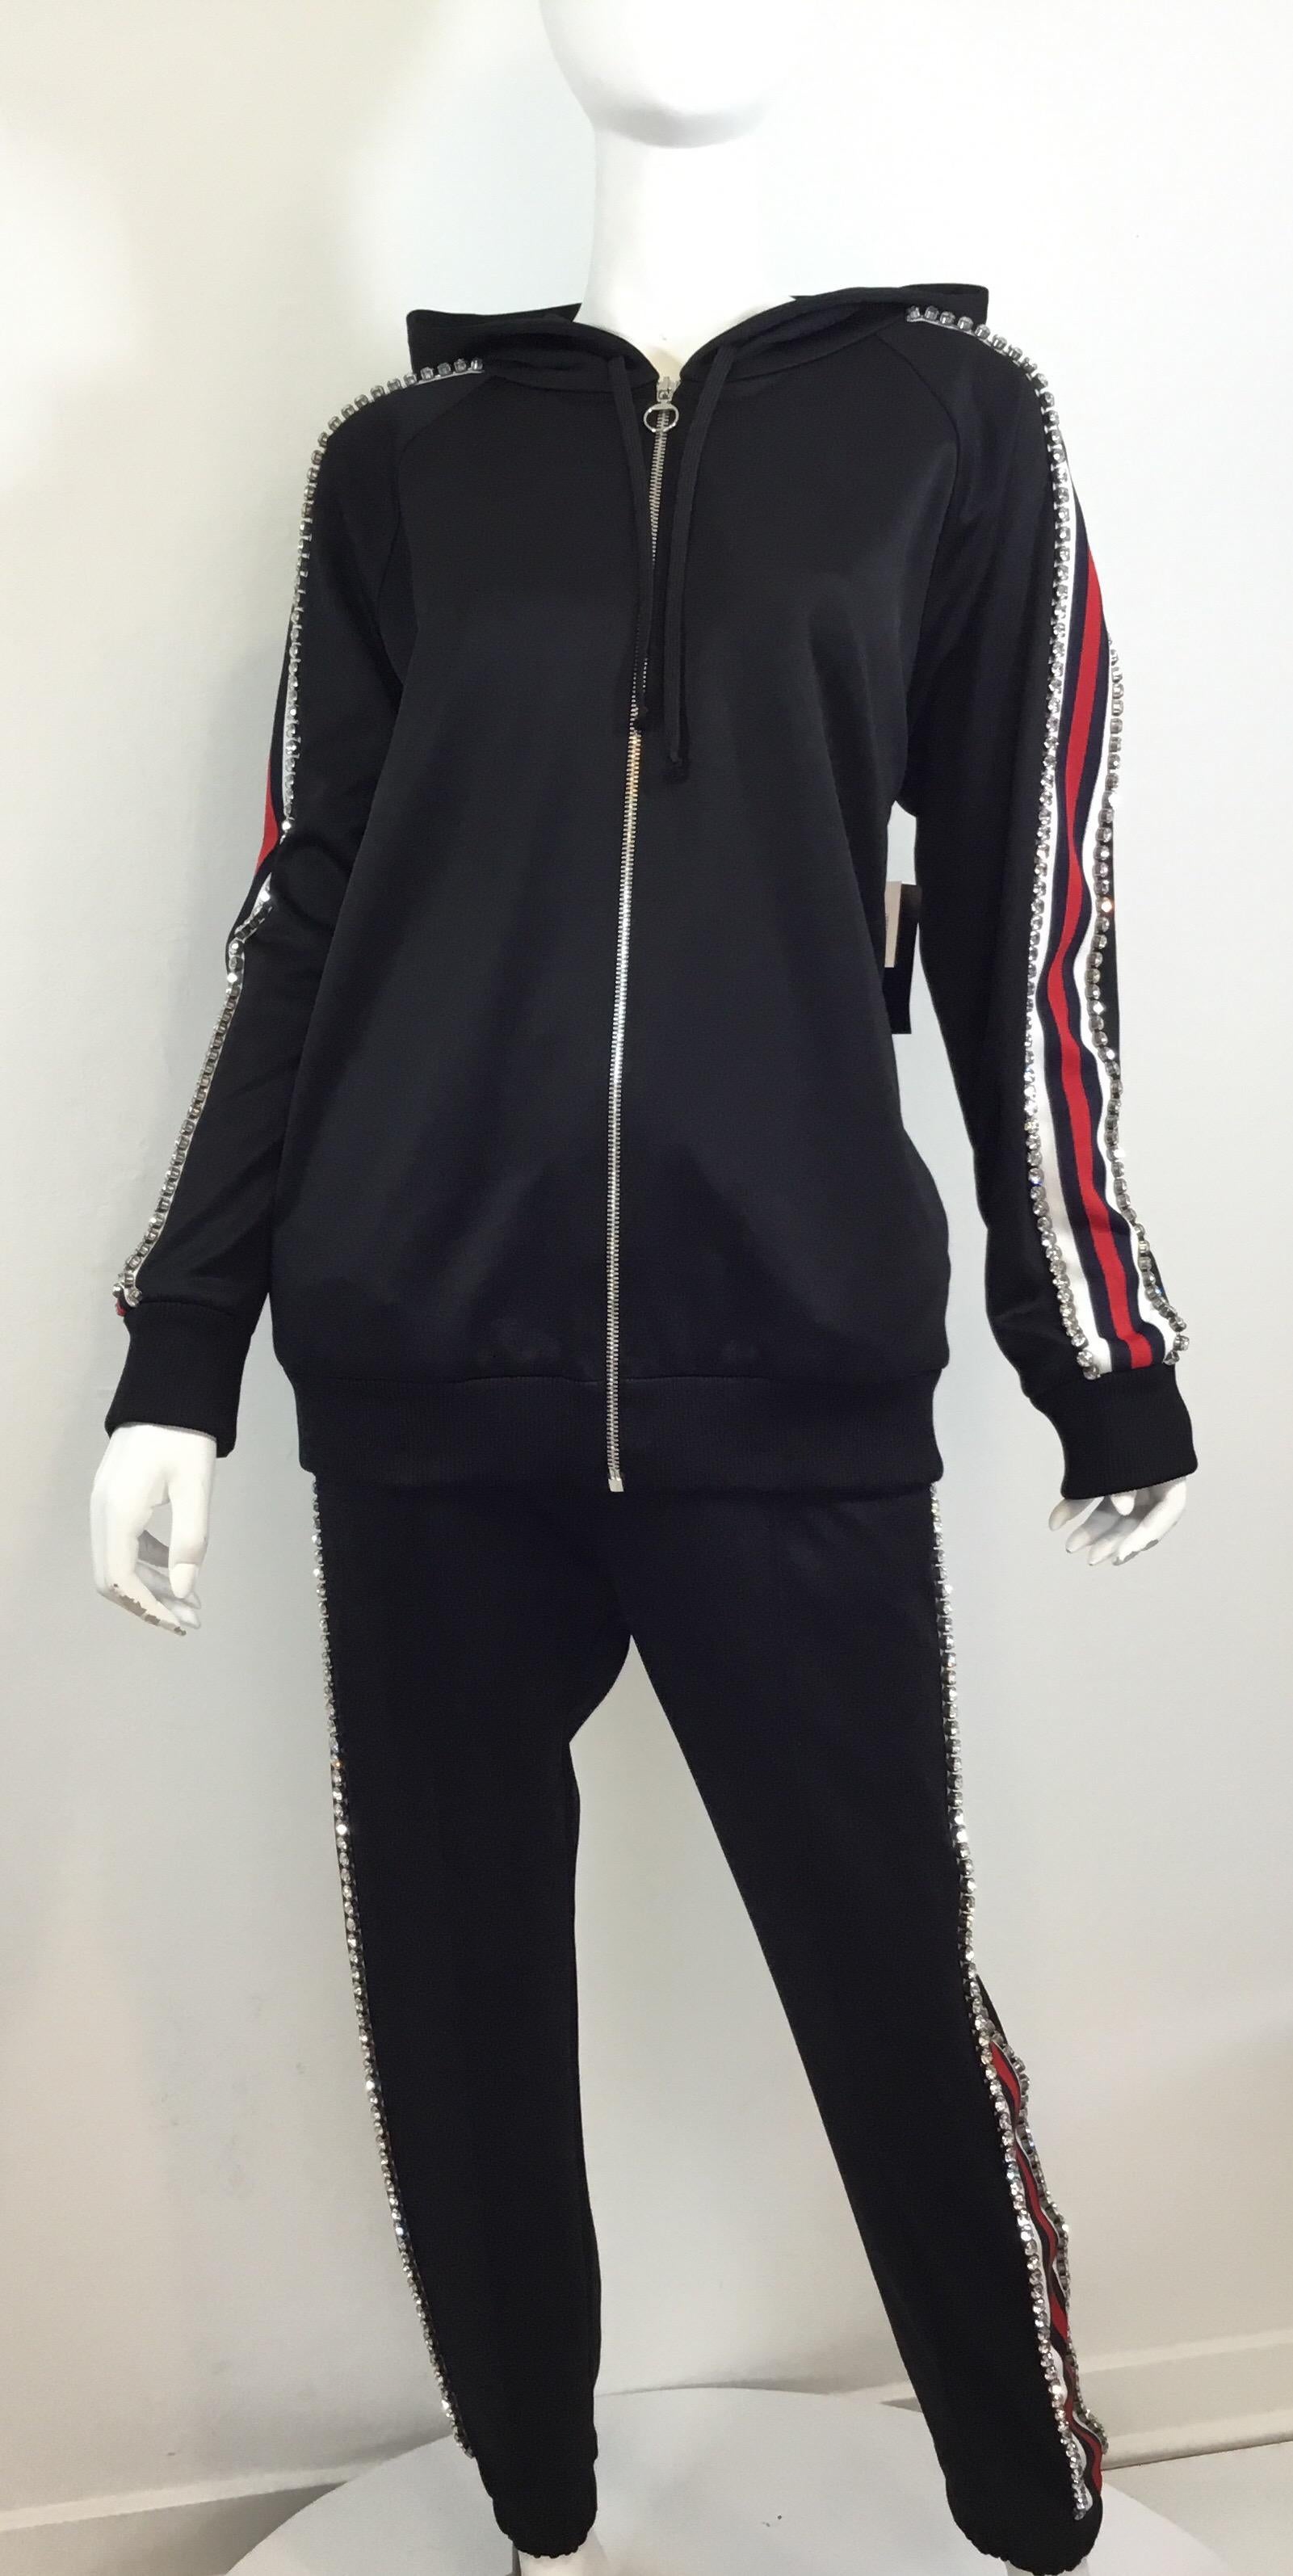 Gucci tracksuit featured in a black tech-jersey fabric with a red and navy web panel along the sides encrusted with Swarovski crystals. Jacket is hooded and has a zippered fastening. Pants have a drawstring fastening at the waist and gathered